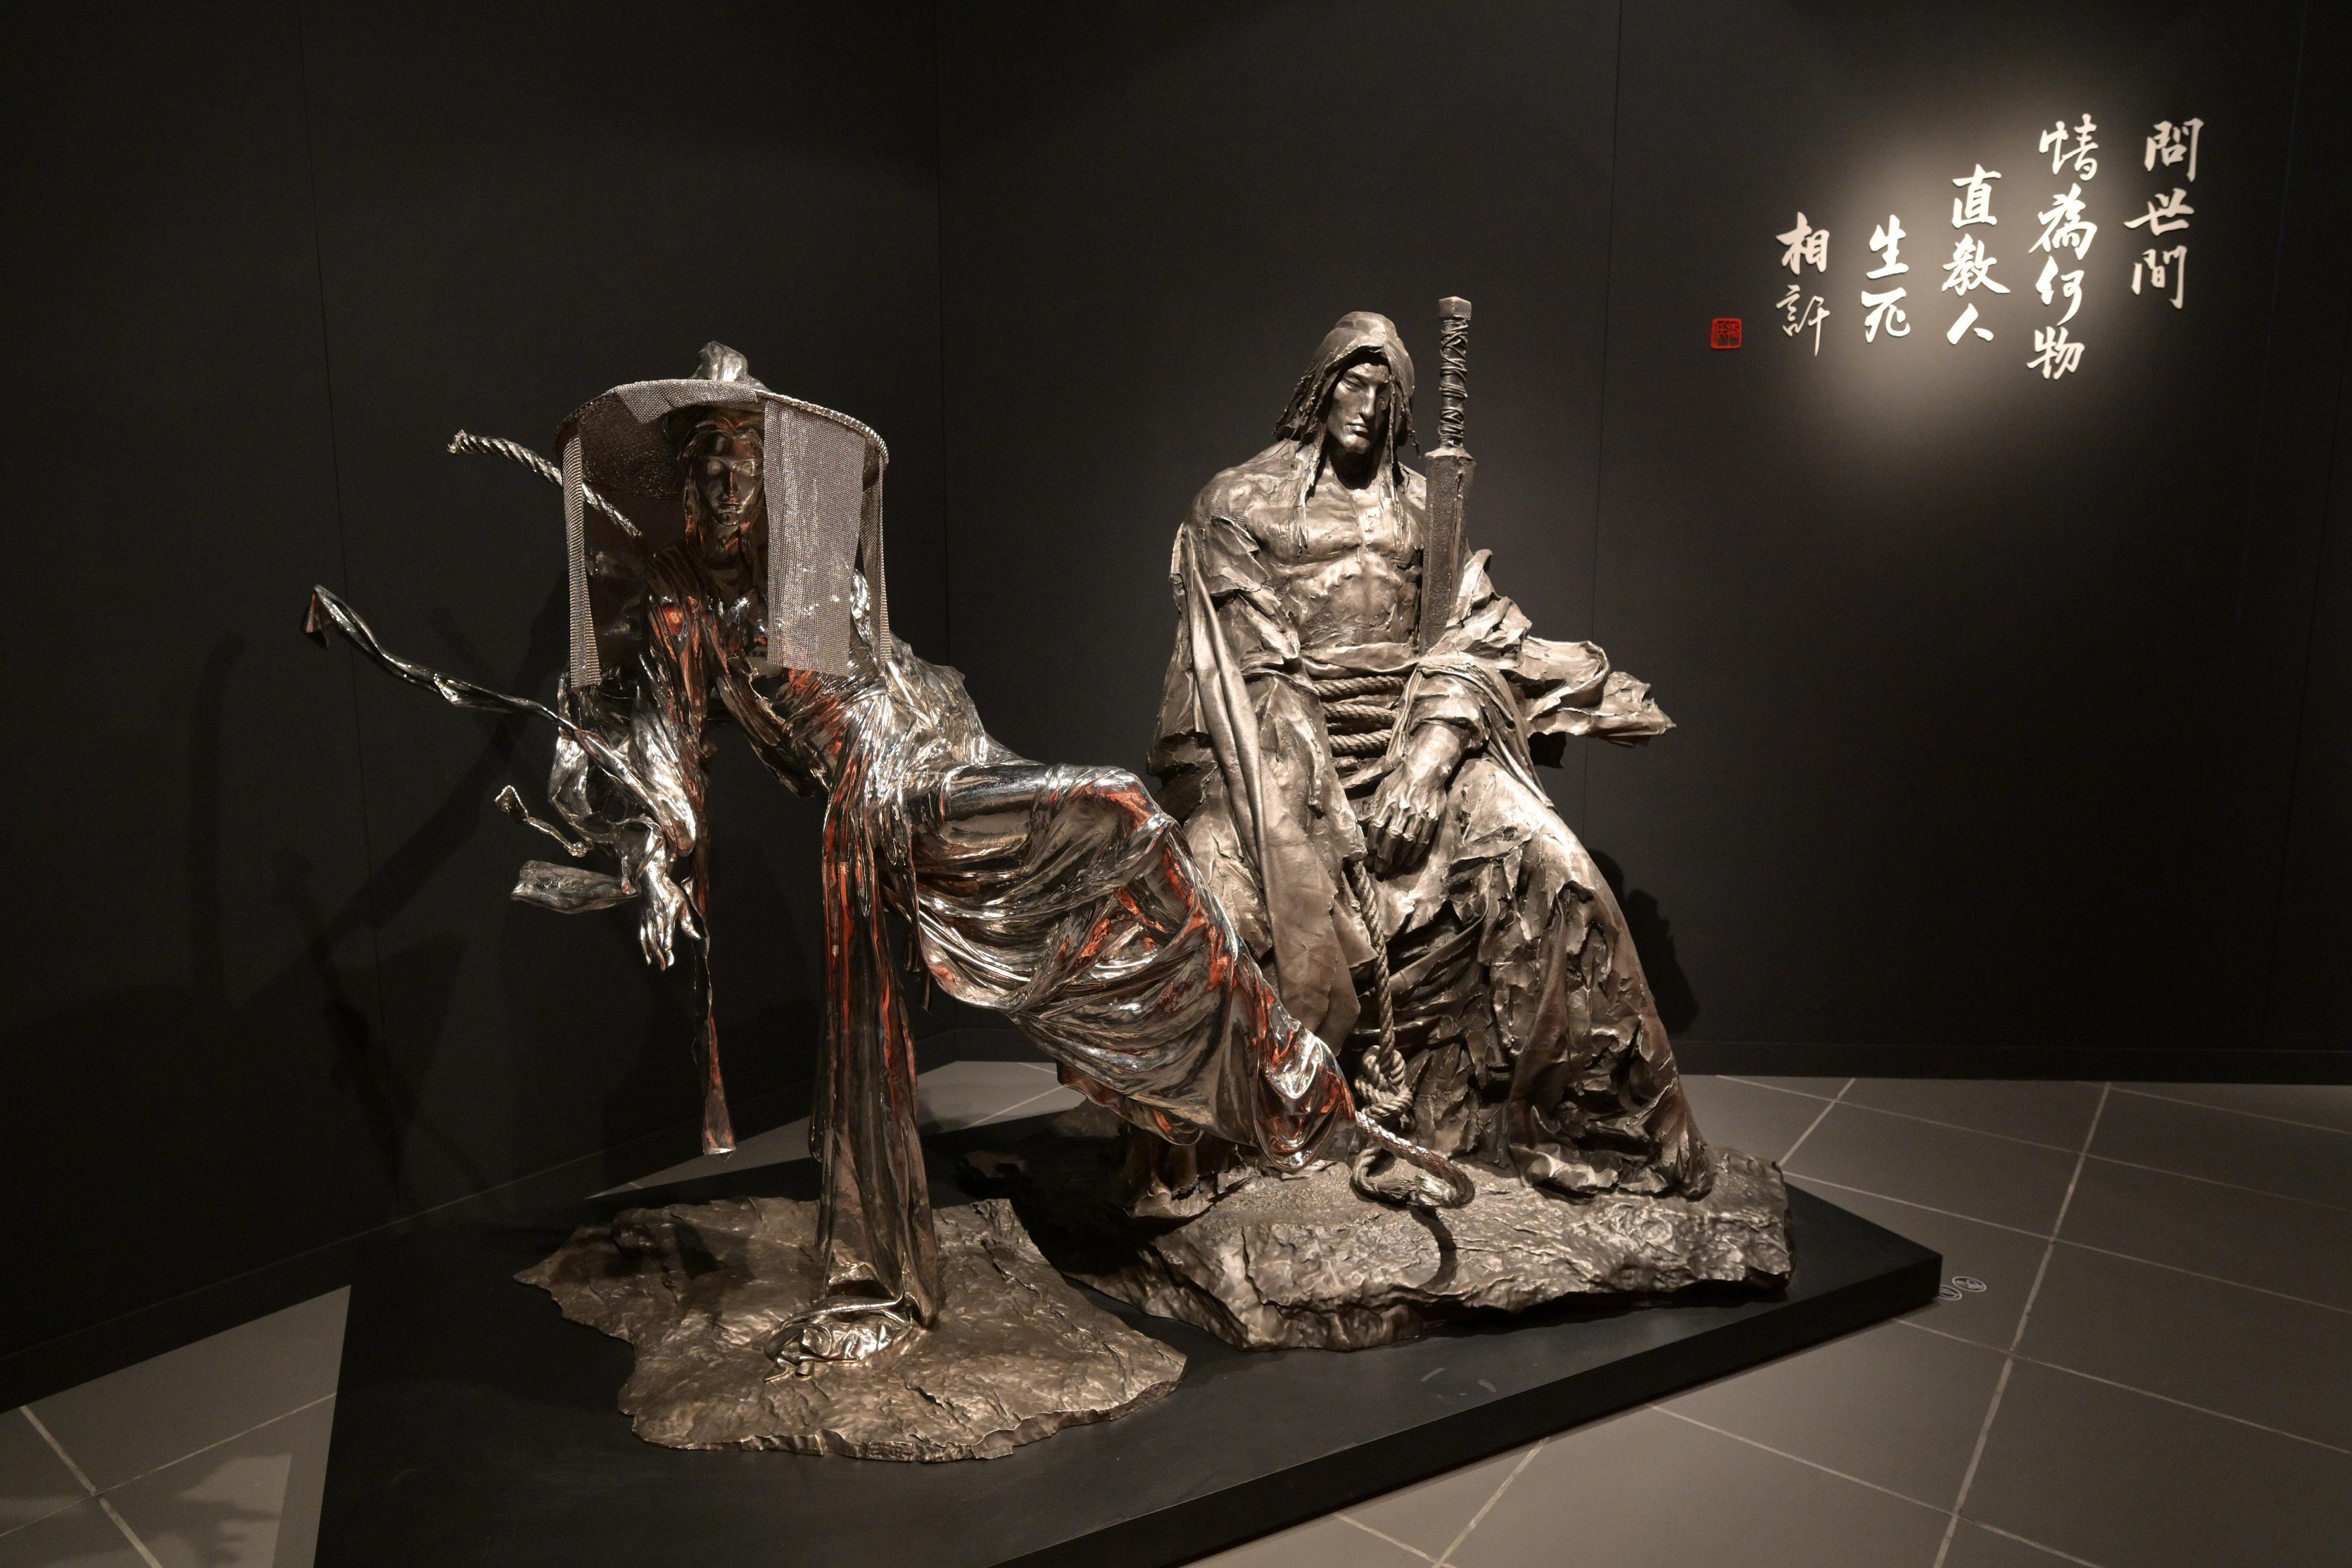 To commemorate the 100th anniversary of the birth of Dr Louis Cha (Jin Yong), the Hong Kong Heritage Museum (HKHM) will present the exhibition "A Path to Glory - Jin Yong's Centennial Memorial, Sculpted by Ren Zhe" from tomorrow (March 16). Picture shows the sculpture “Yang Guo”, being lonely and having lost one arm, embracing his sword with the other; and the sculpture “Xiaolongnu” leaning lightly and effortlessly on a rope, showing her divine virtue.